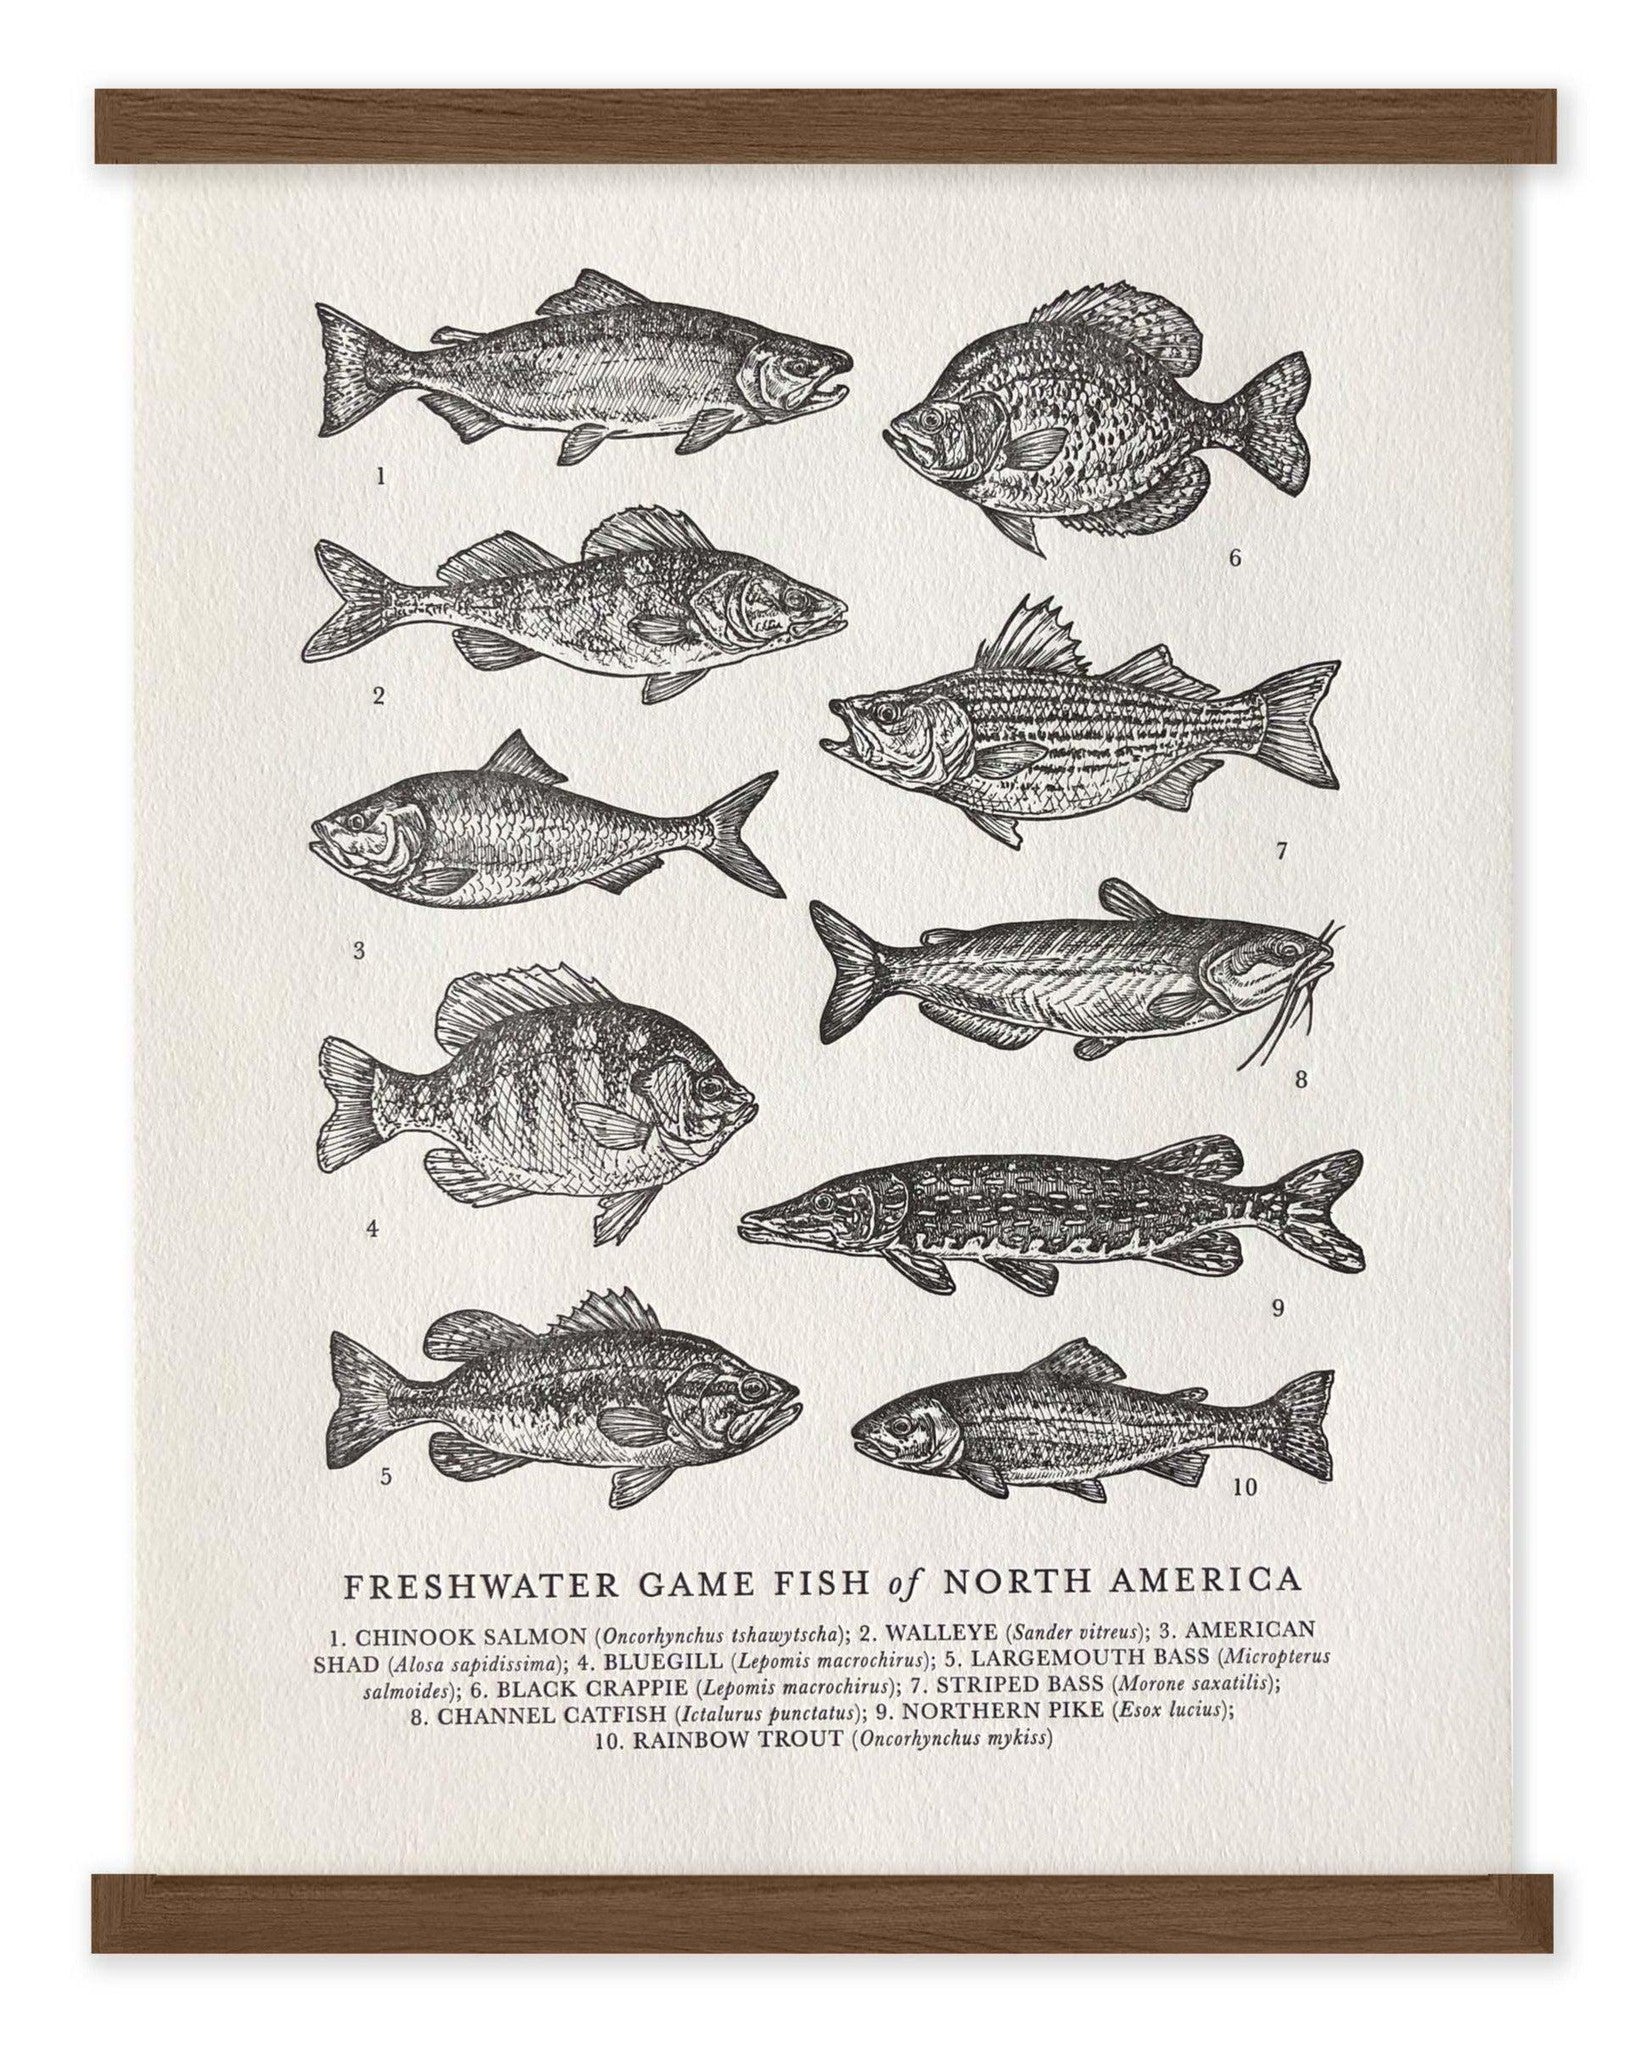 Freshwater Game Fish Guide Letterpress Print - The Wild Wander